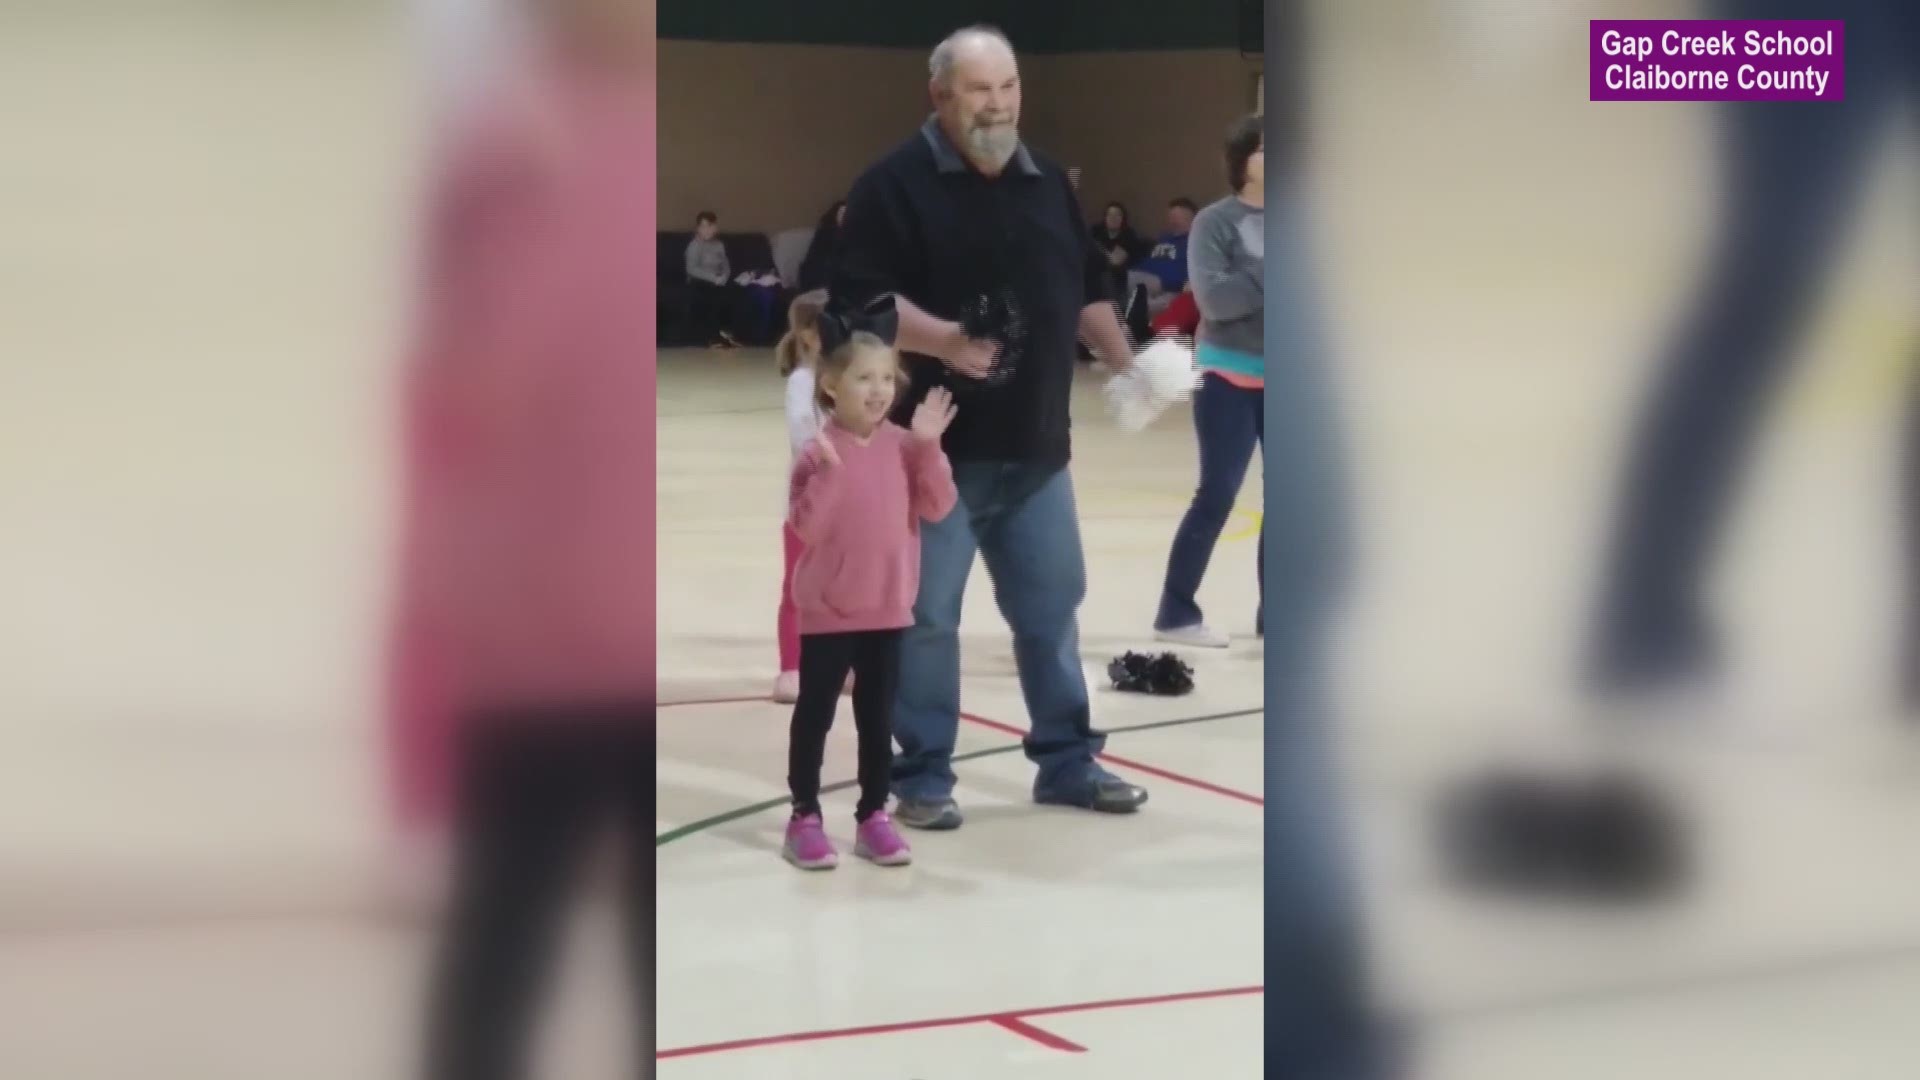 Watch Jeff Harville and his four-year-old granddaughter McKinly Lester adorably do the Chicken Dance together.